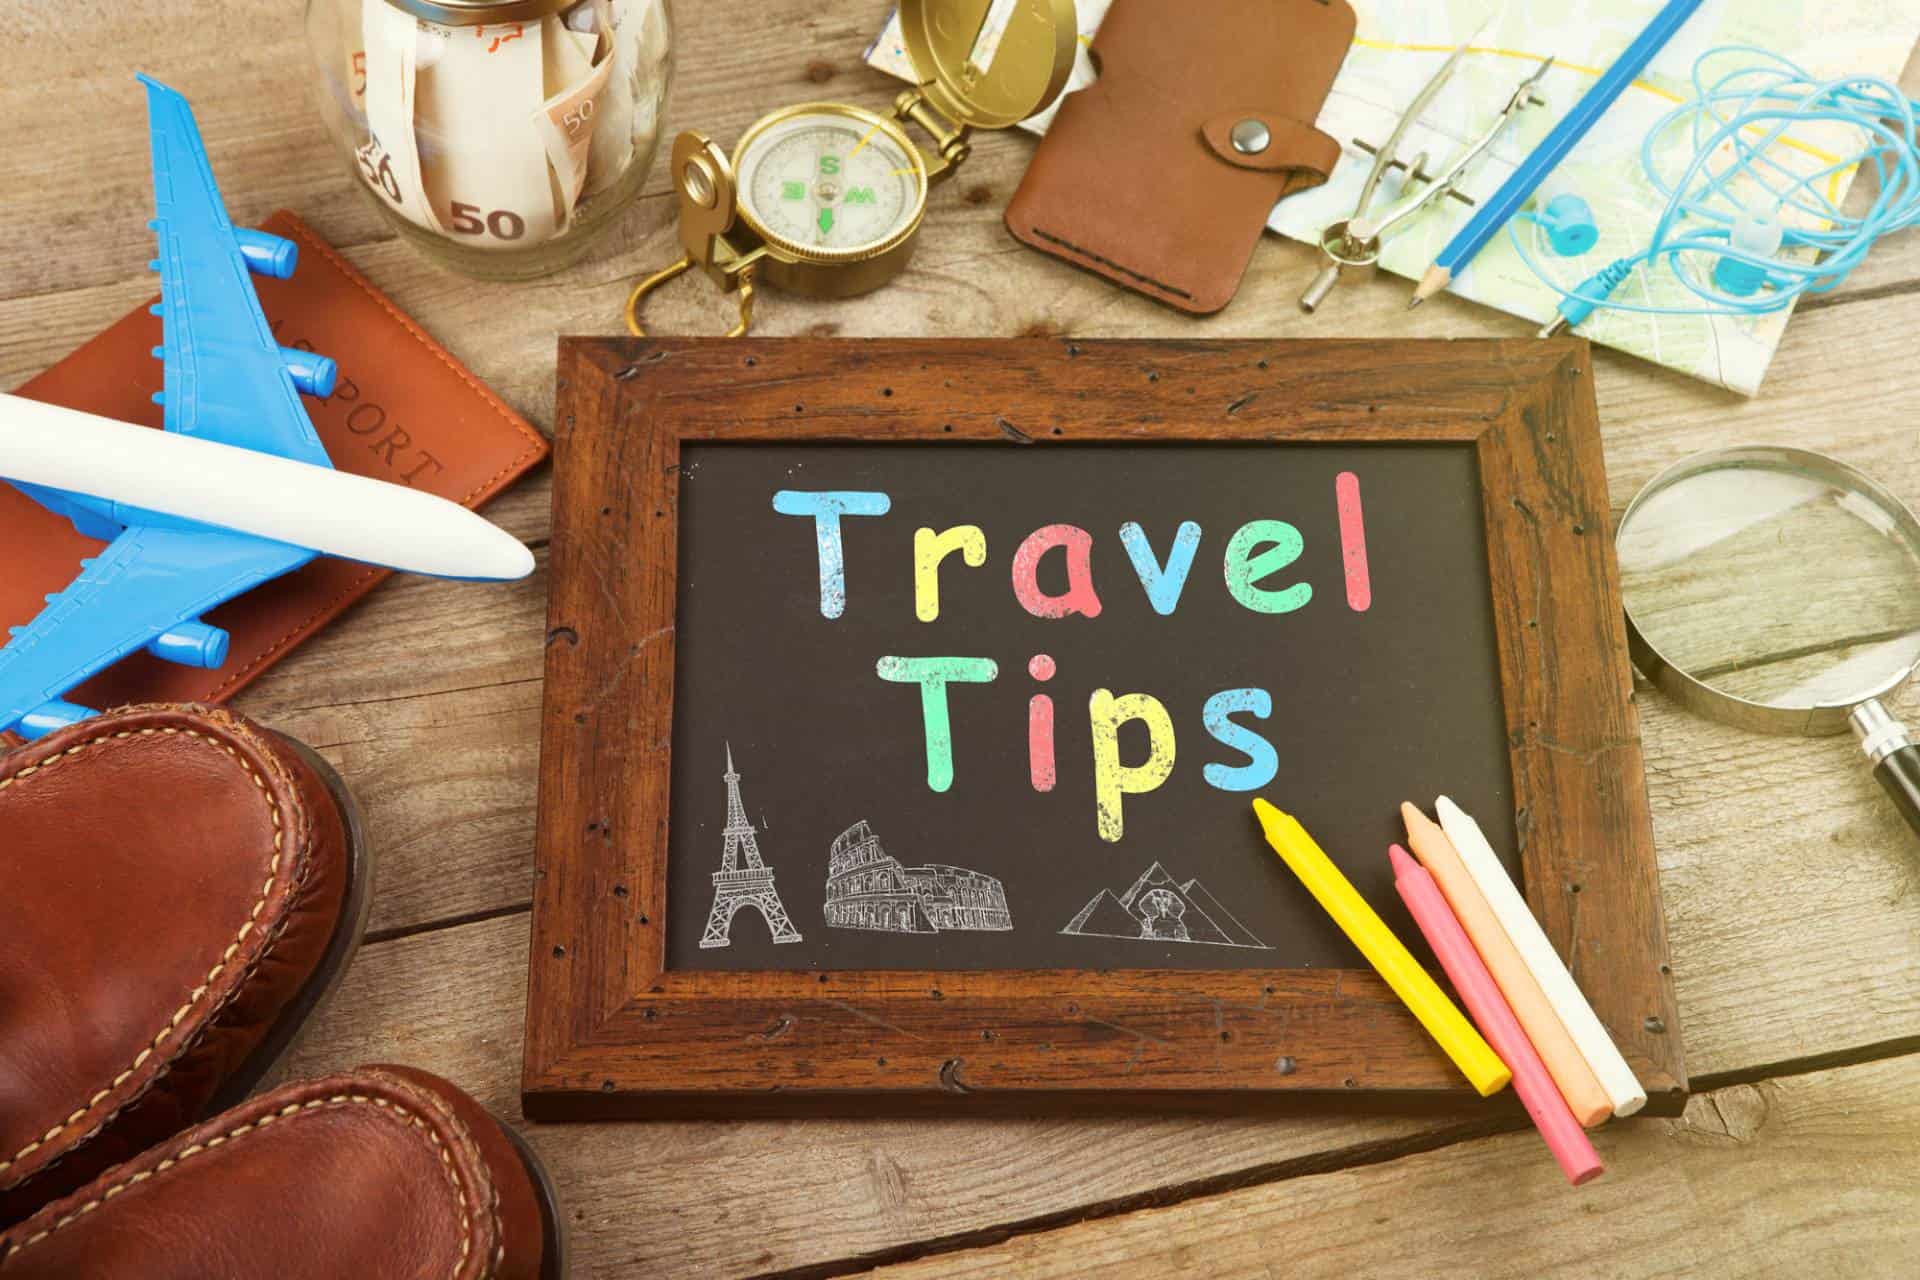 What are the top 10 “Un-Official” travel tips you might suggest?